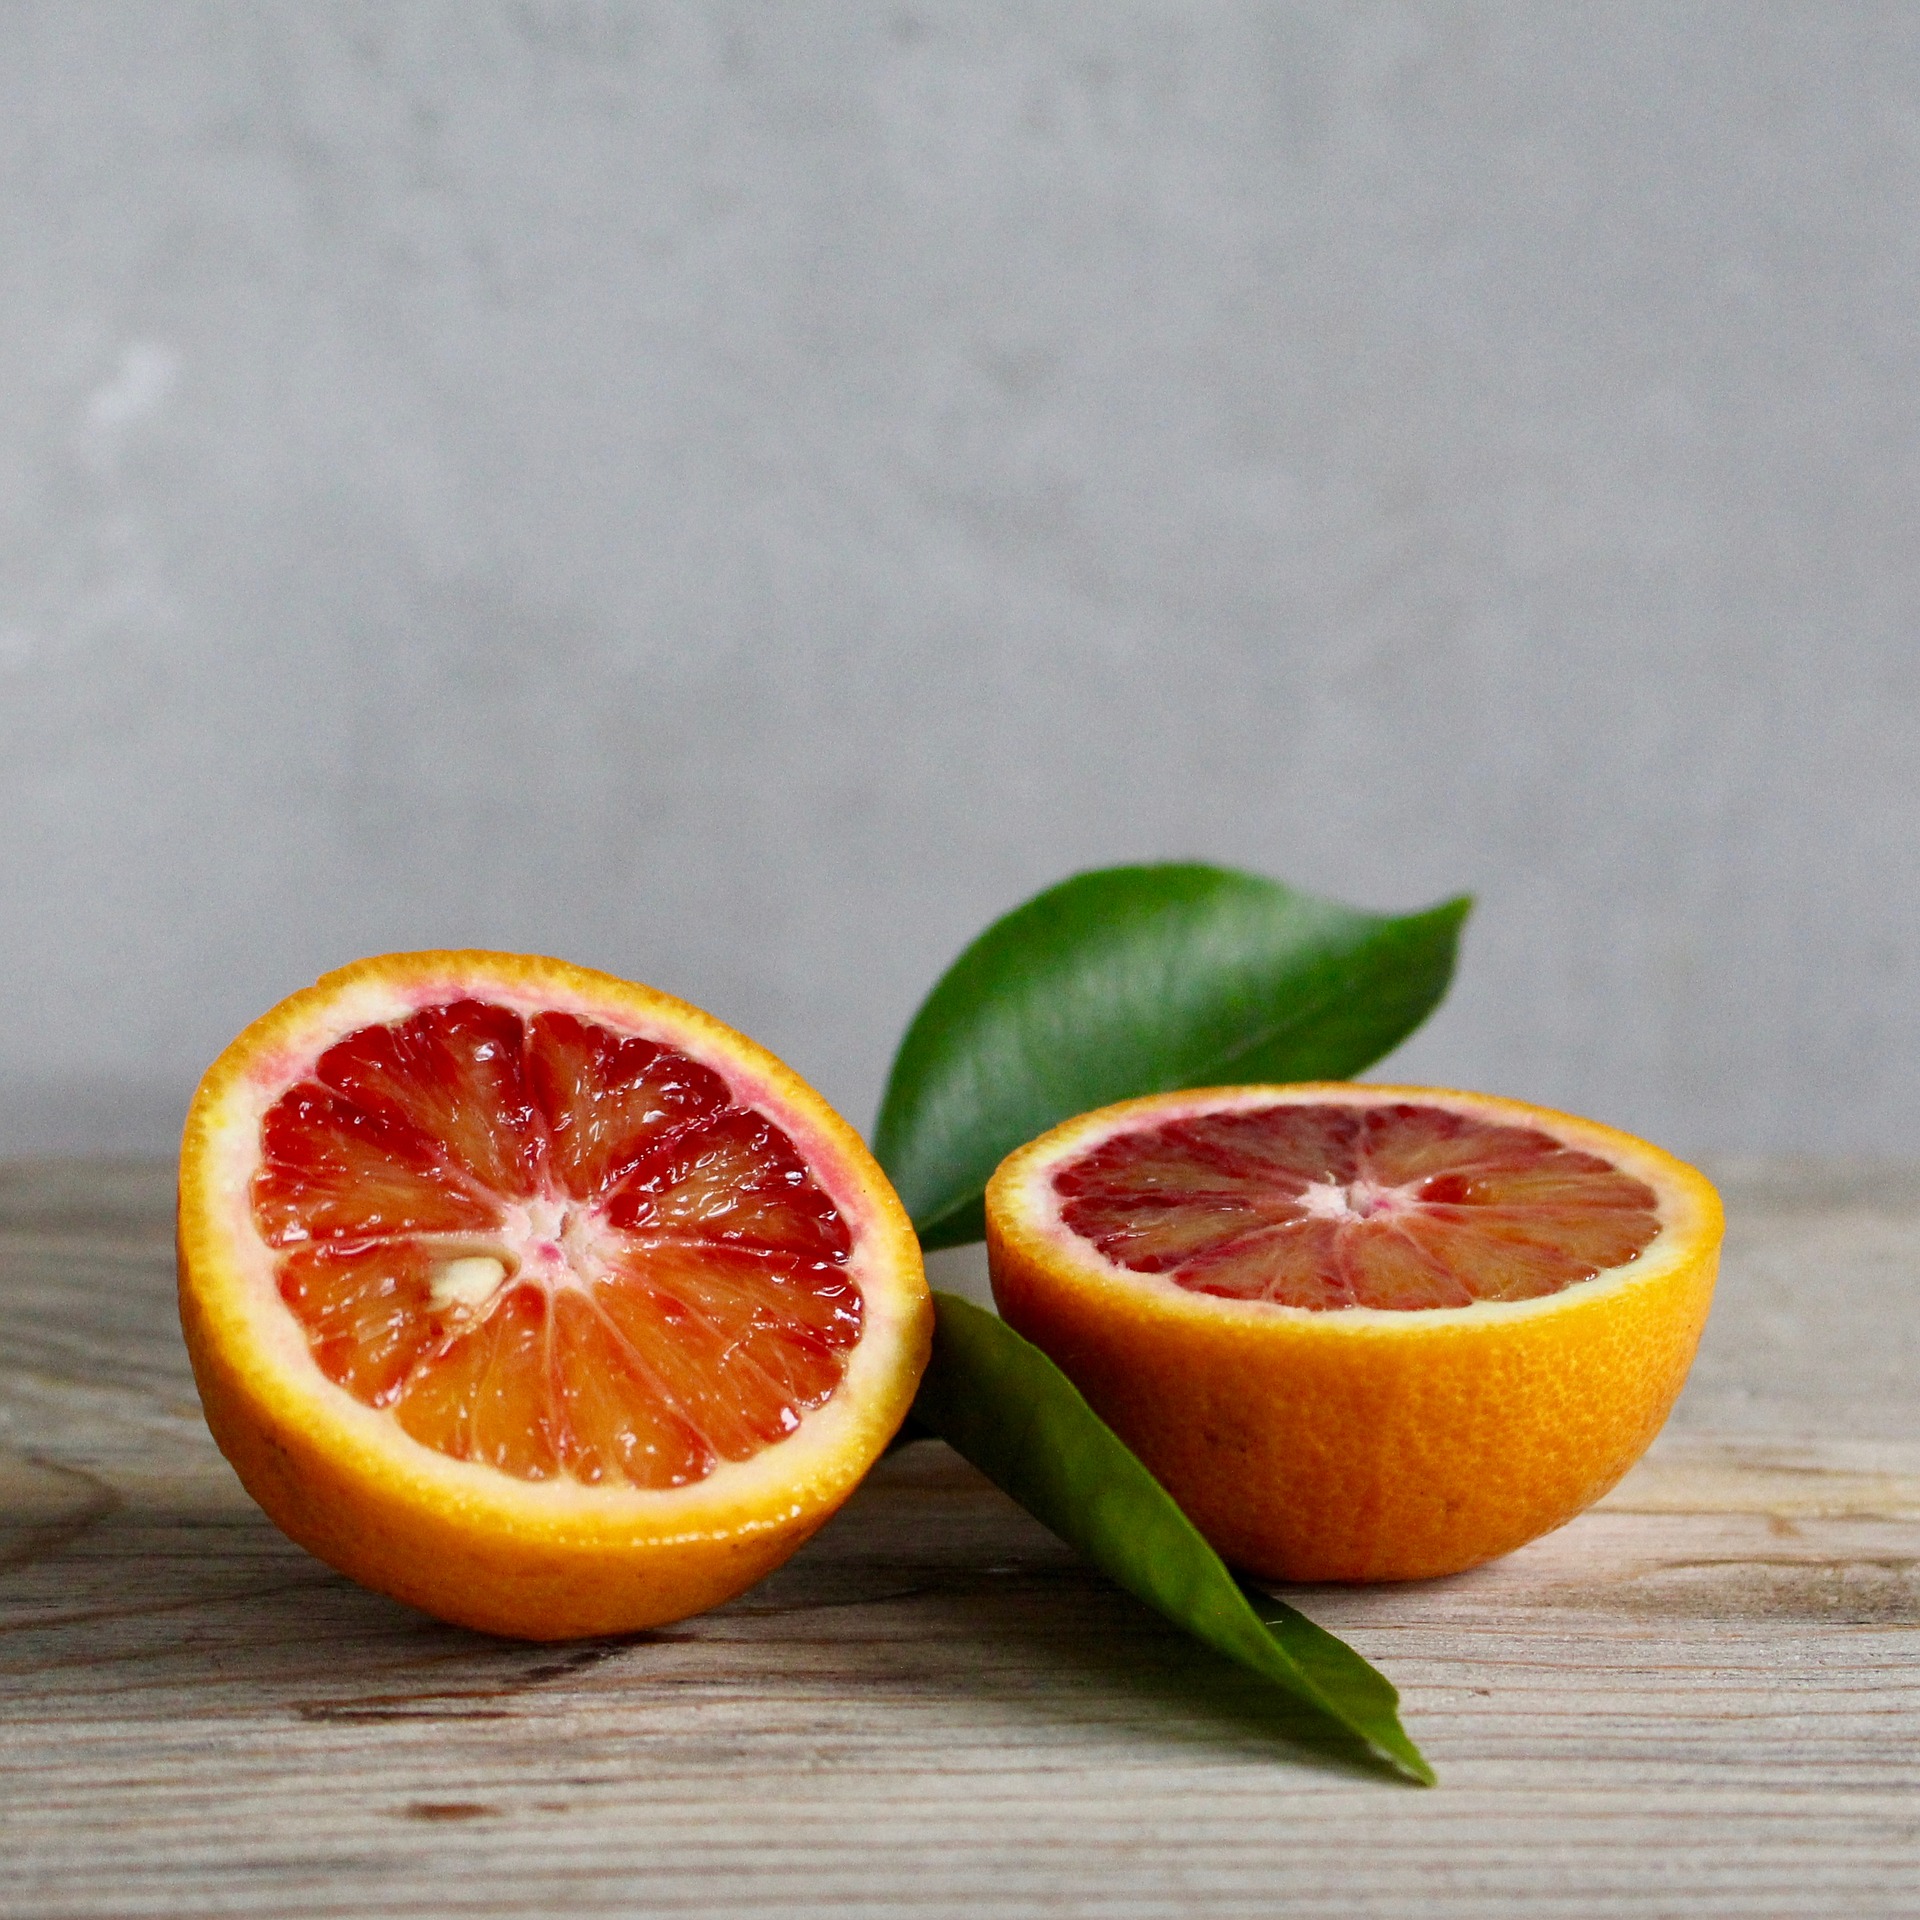 Difference between: oranges and blood oranges